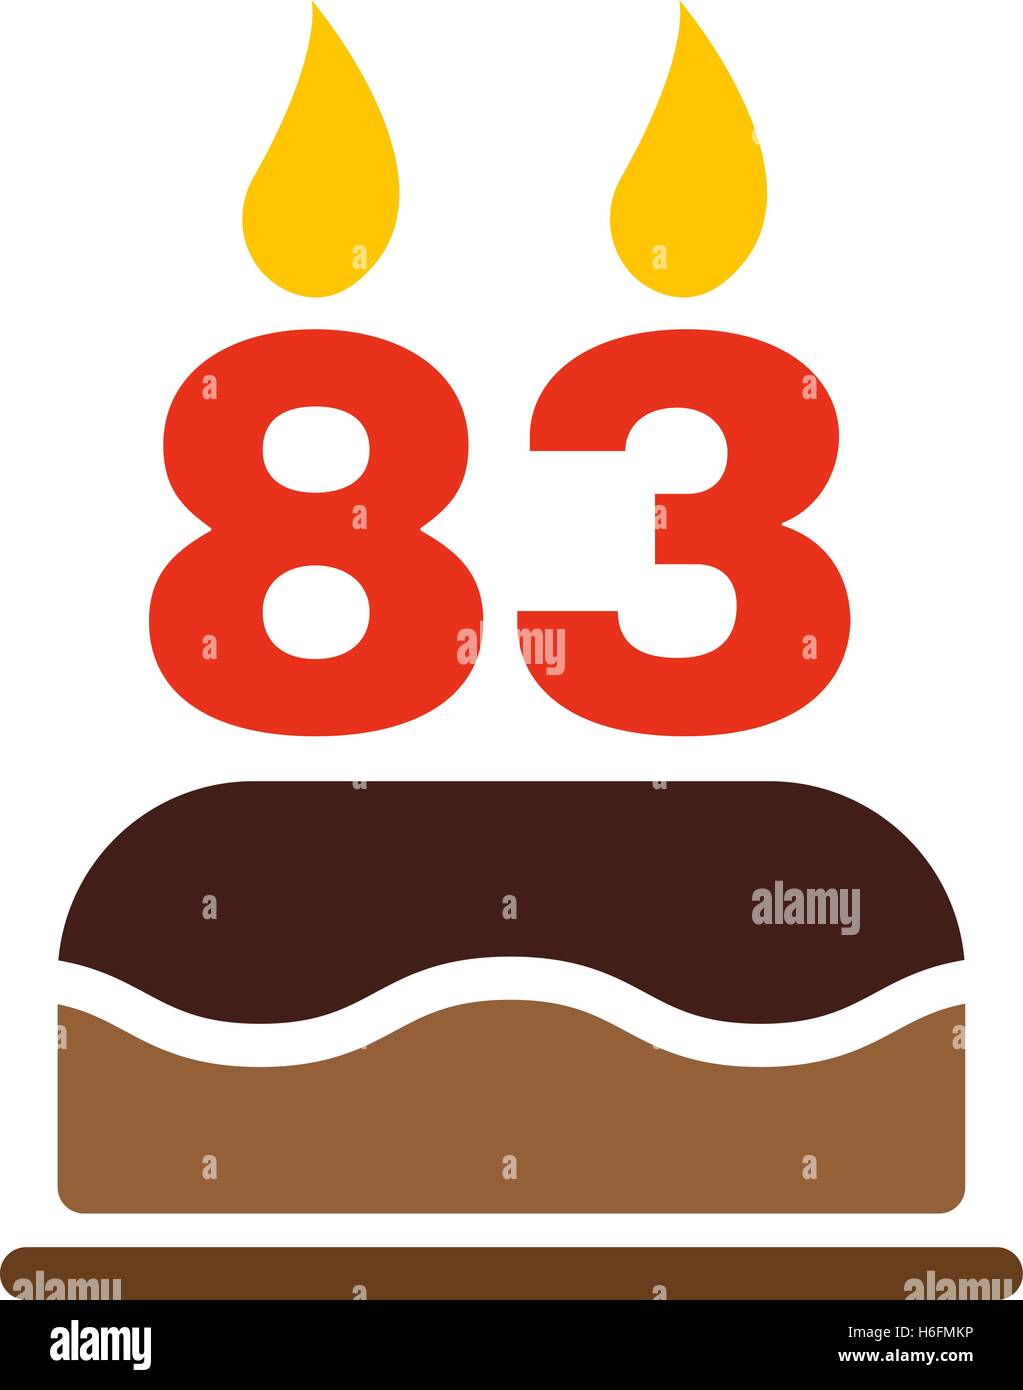 The birthday cake with candles in the form of number 83 icon. Birthday symbol. Flat Vector illustration Stock Vector